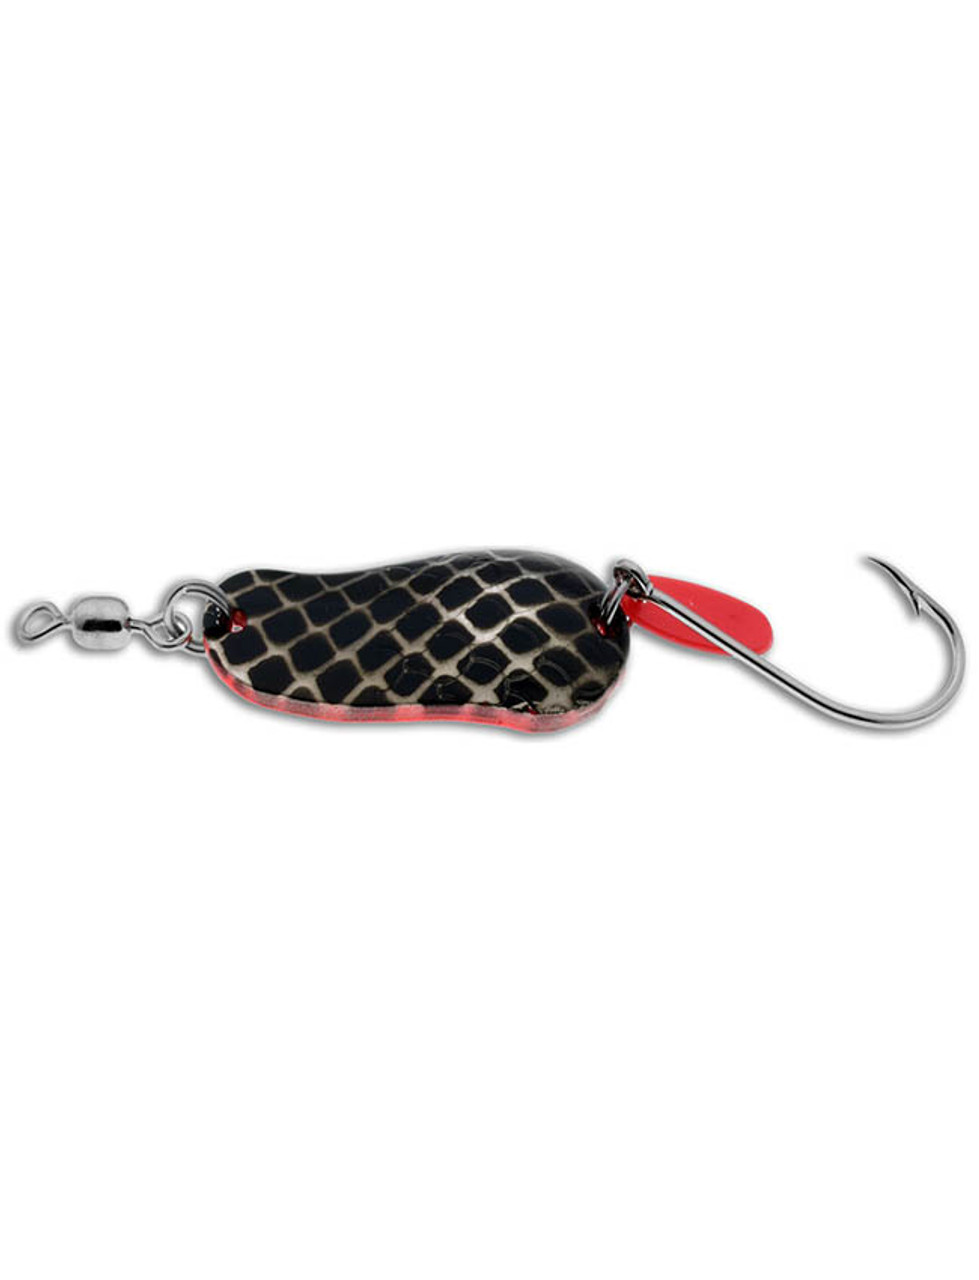 Gibbs Kit-A-Mat #55 (3/4oz) Black Scale Red Back - The Harbour